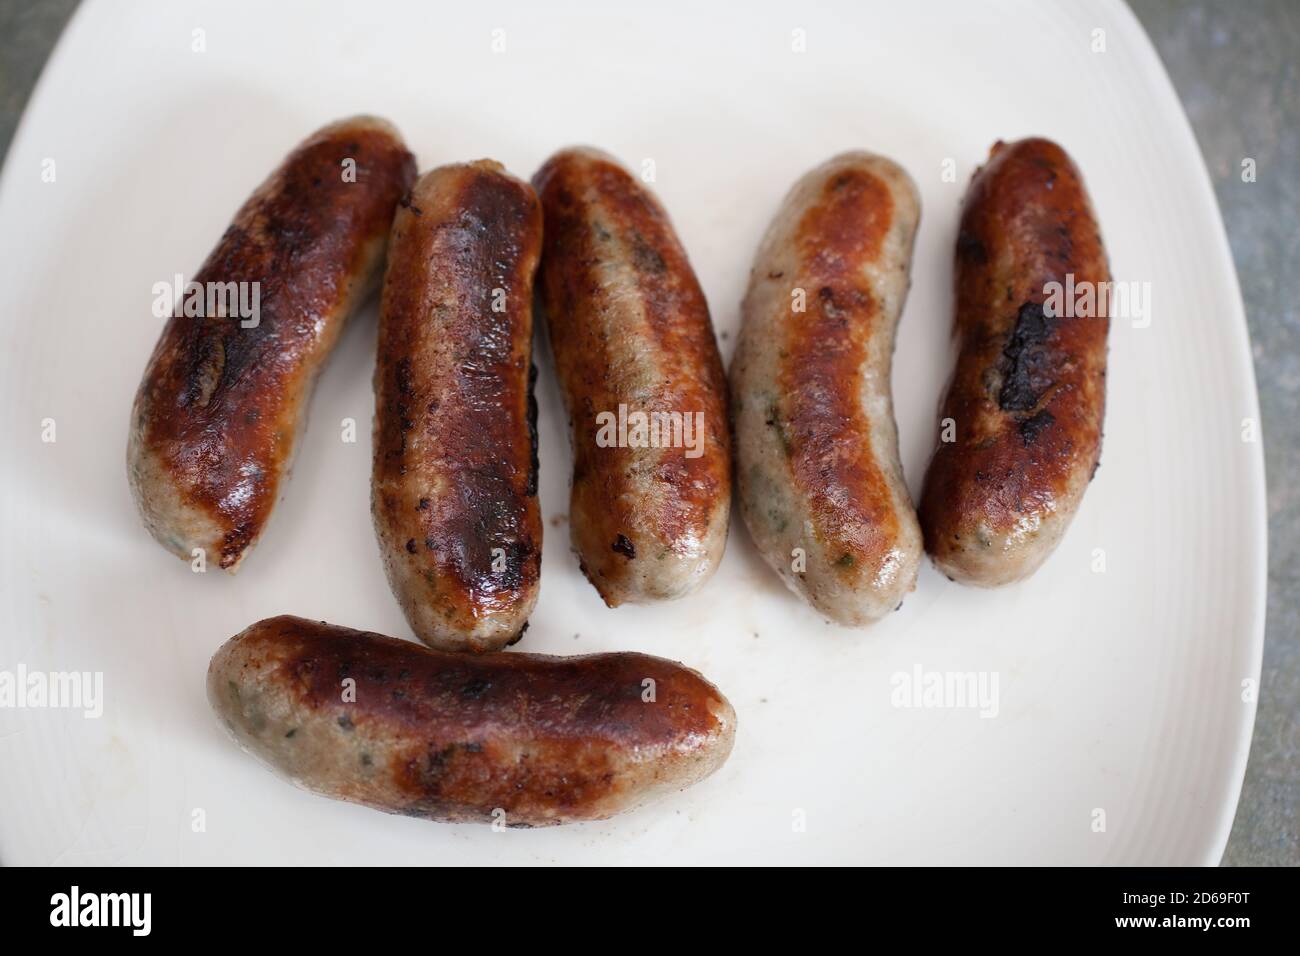 Half a dozen cooked British pork sausages on a white plate Stock Photo